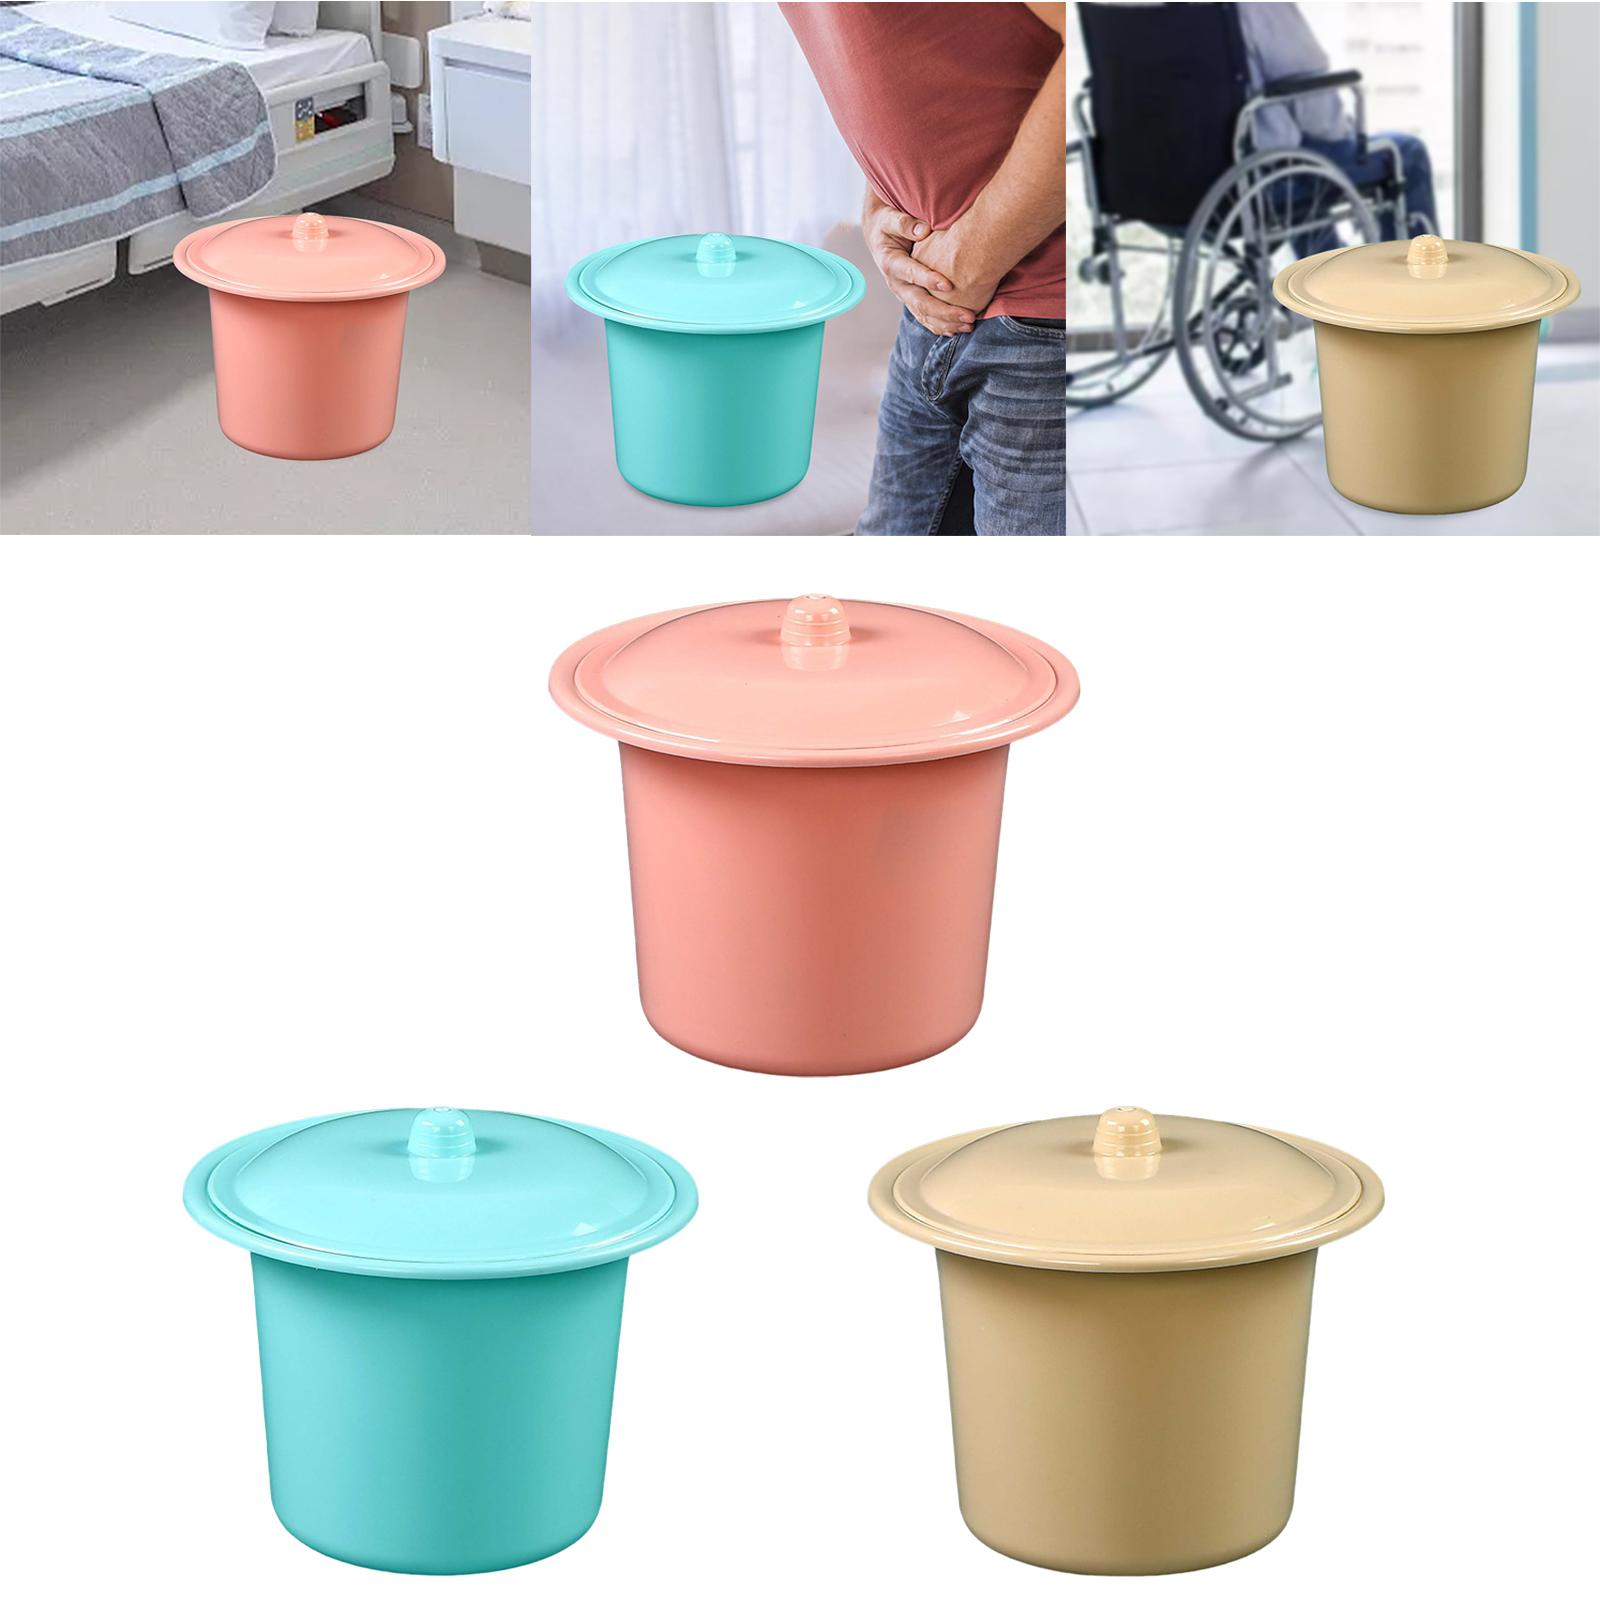 Compact Spittoon Splashproof PP Plastic with Lid Mobile Toilet Potty Pot Urinal Pot for Travel Camping Outdoor Elderly Adults